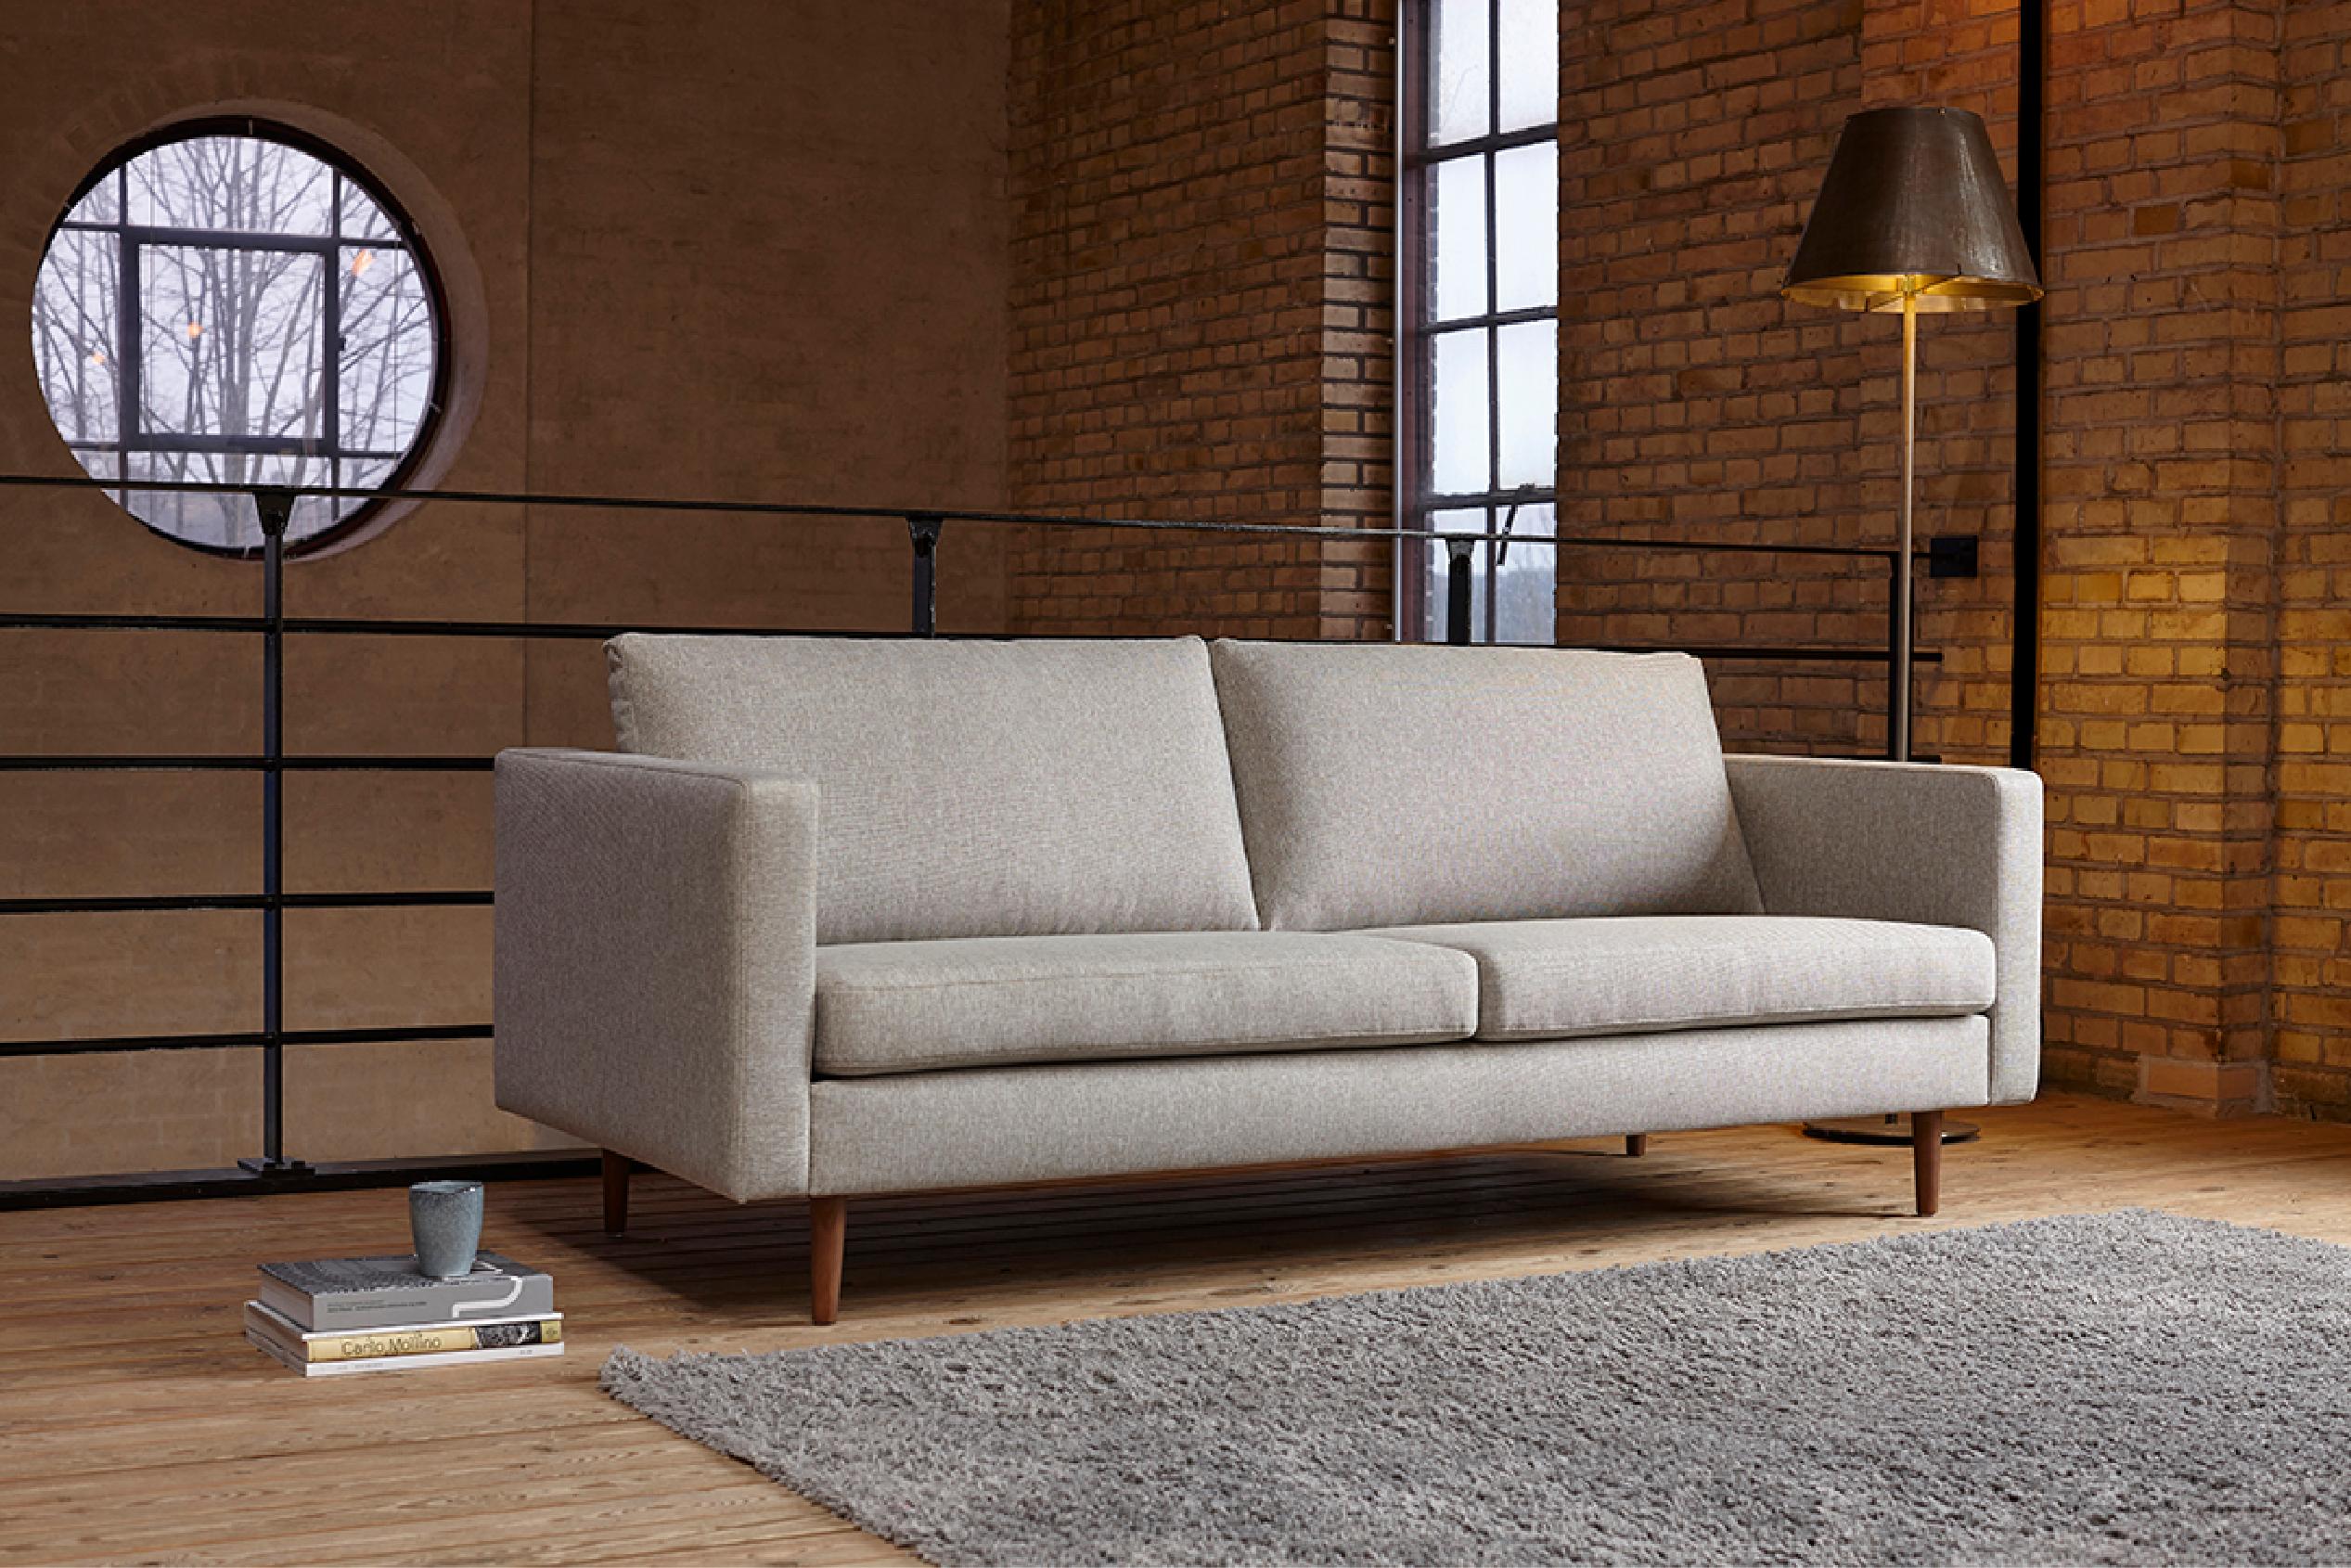 Contemporary Hayche Clasico 3 Seater Sofa - Grey, UK, Made to Order For Sale